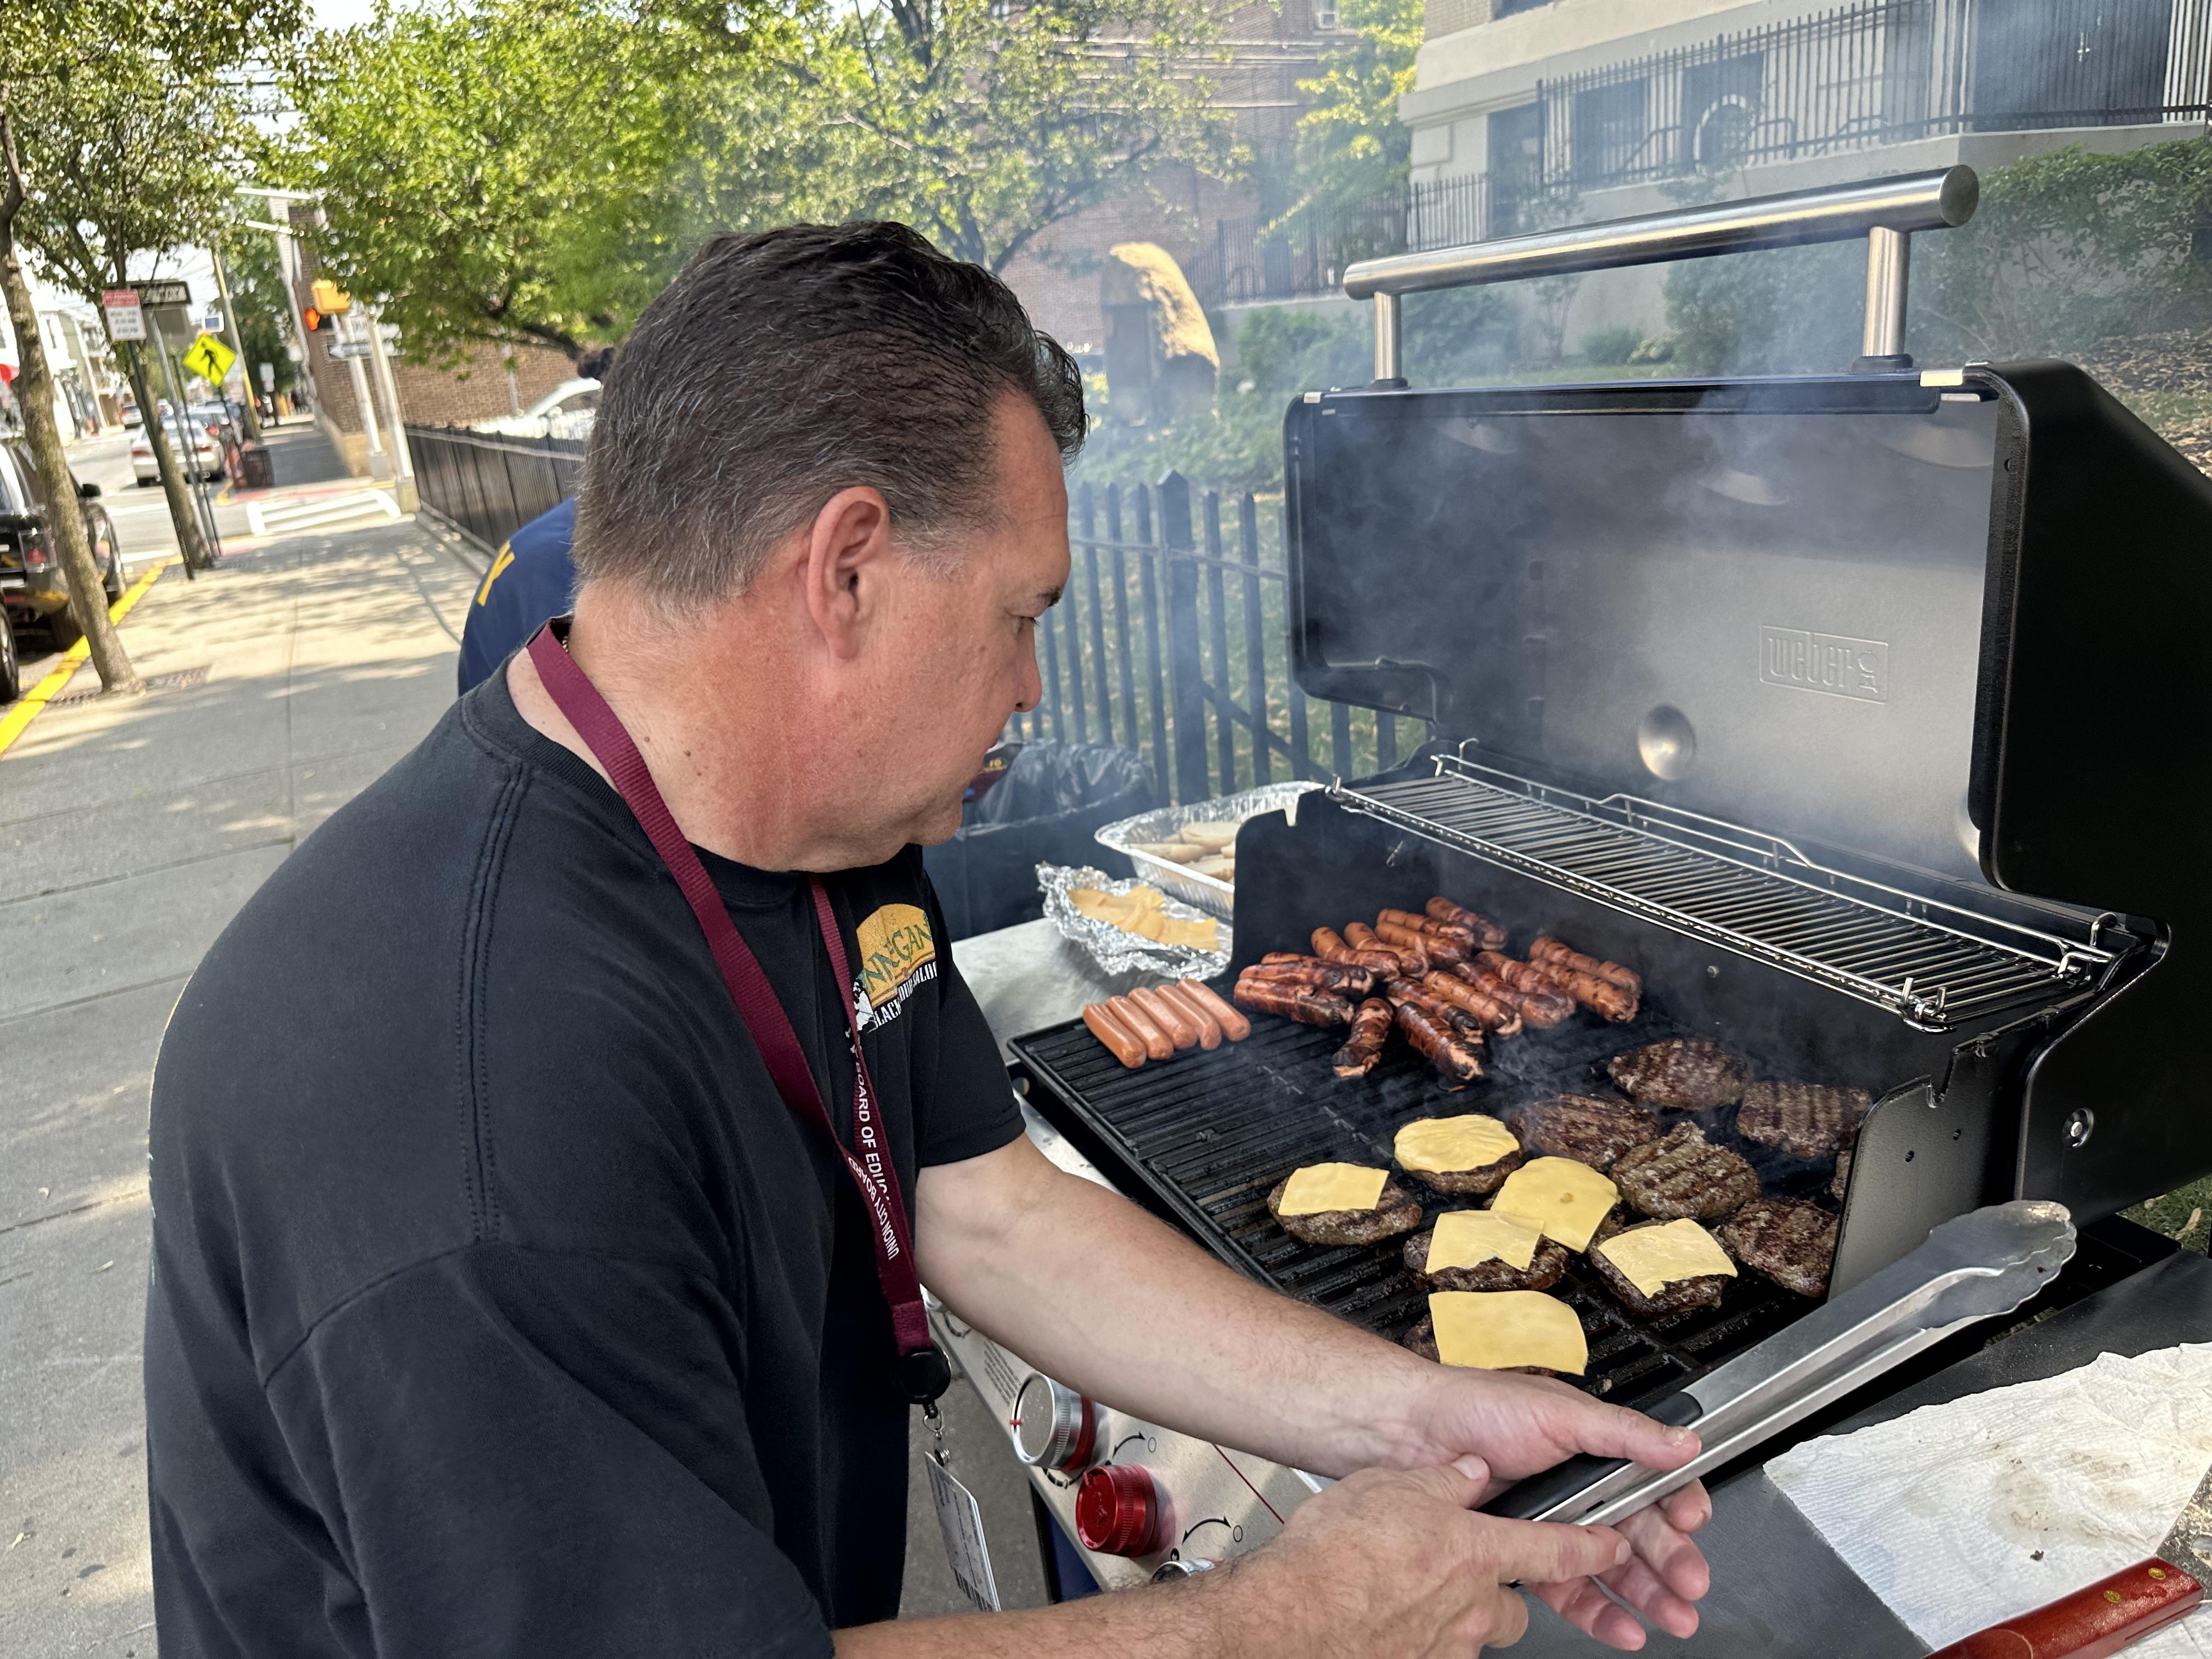 The Union Hill Middle School Summer Barbecue